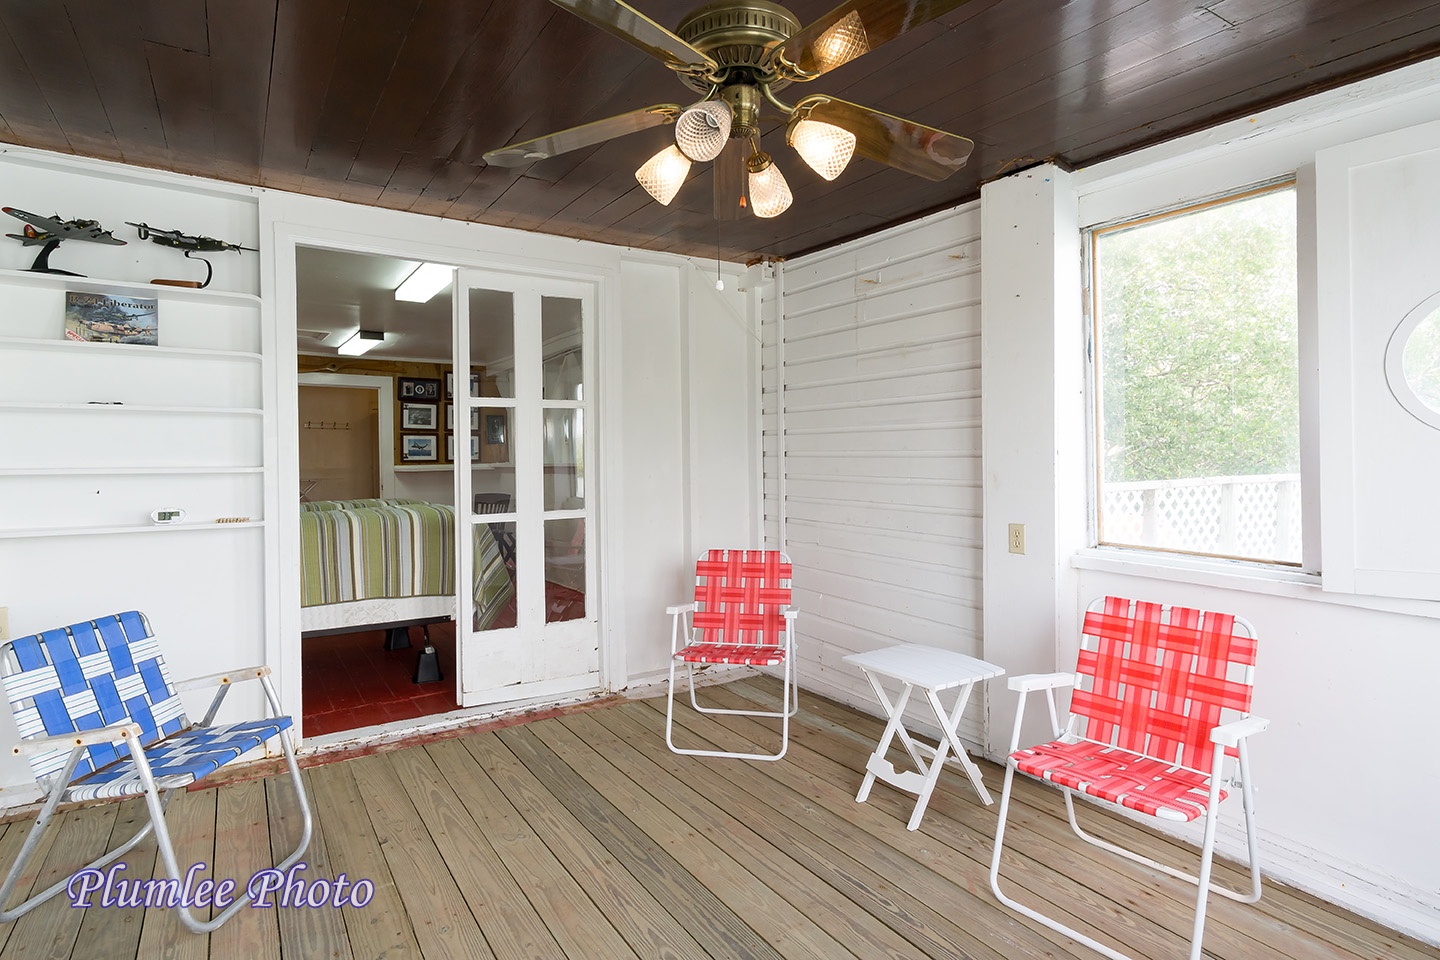 1st Floor.  The screened in Porch has overhead fans and is accessible from Bedroom 1.